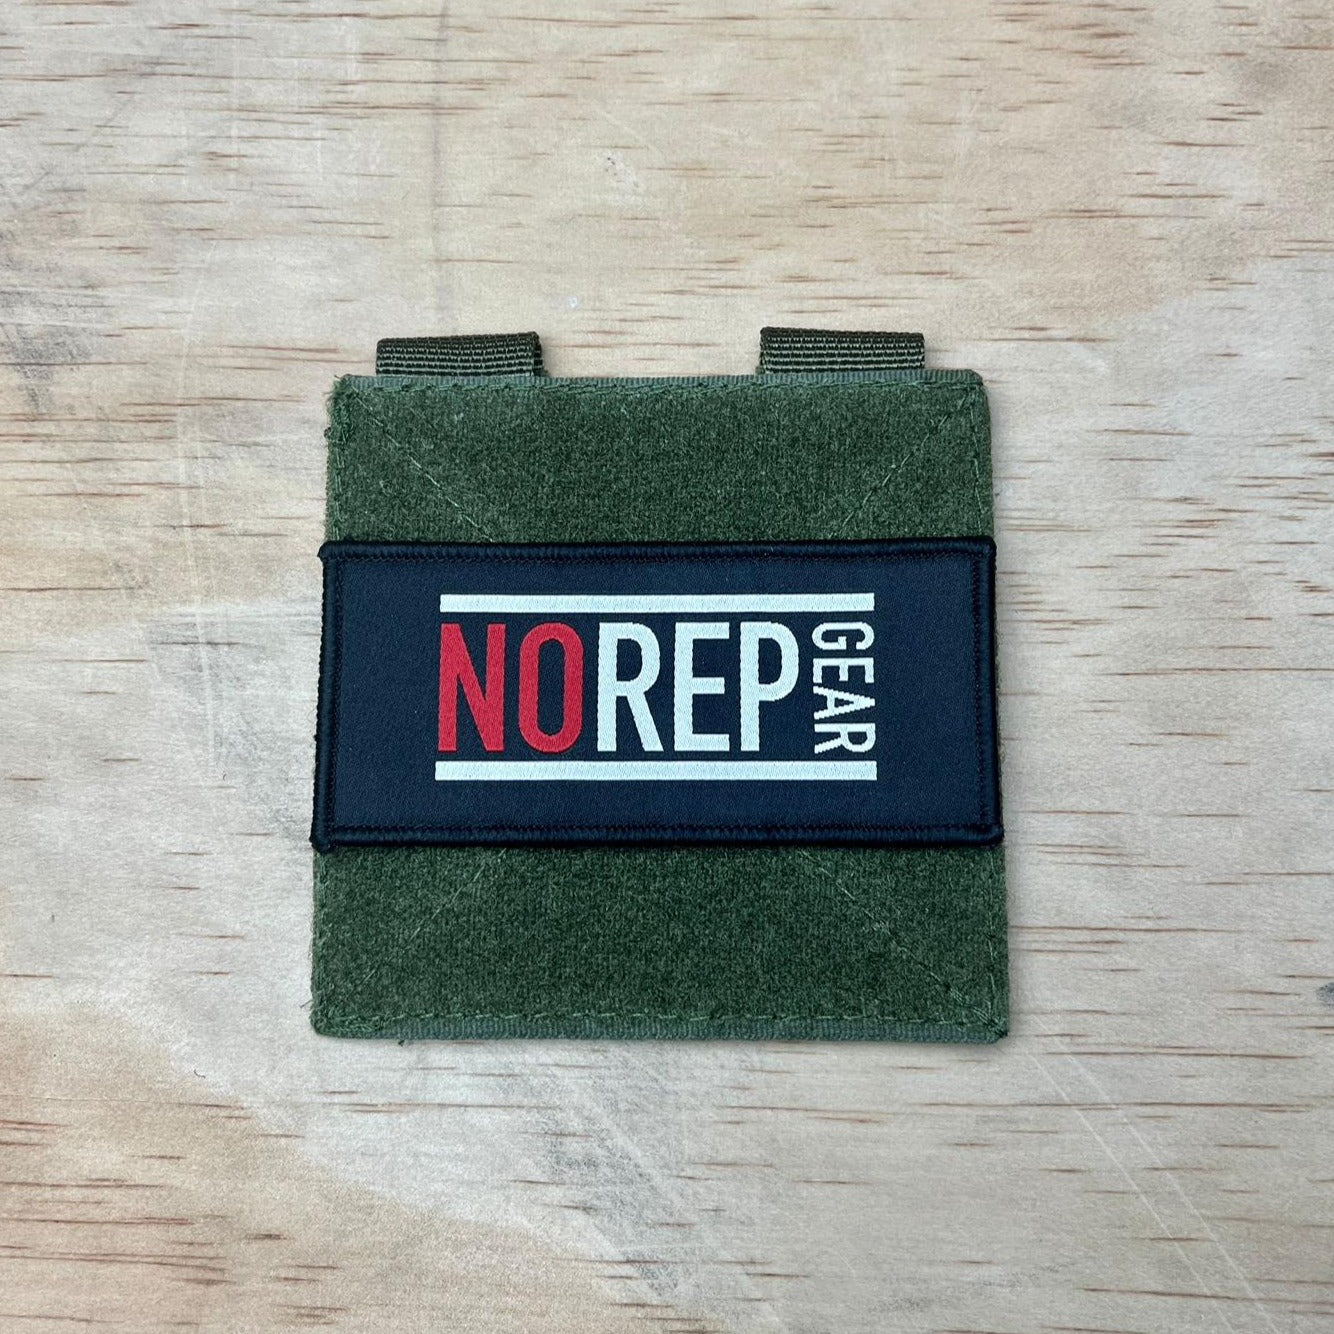 Green velcro extension patch